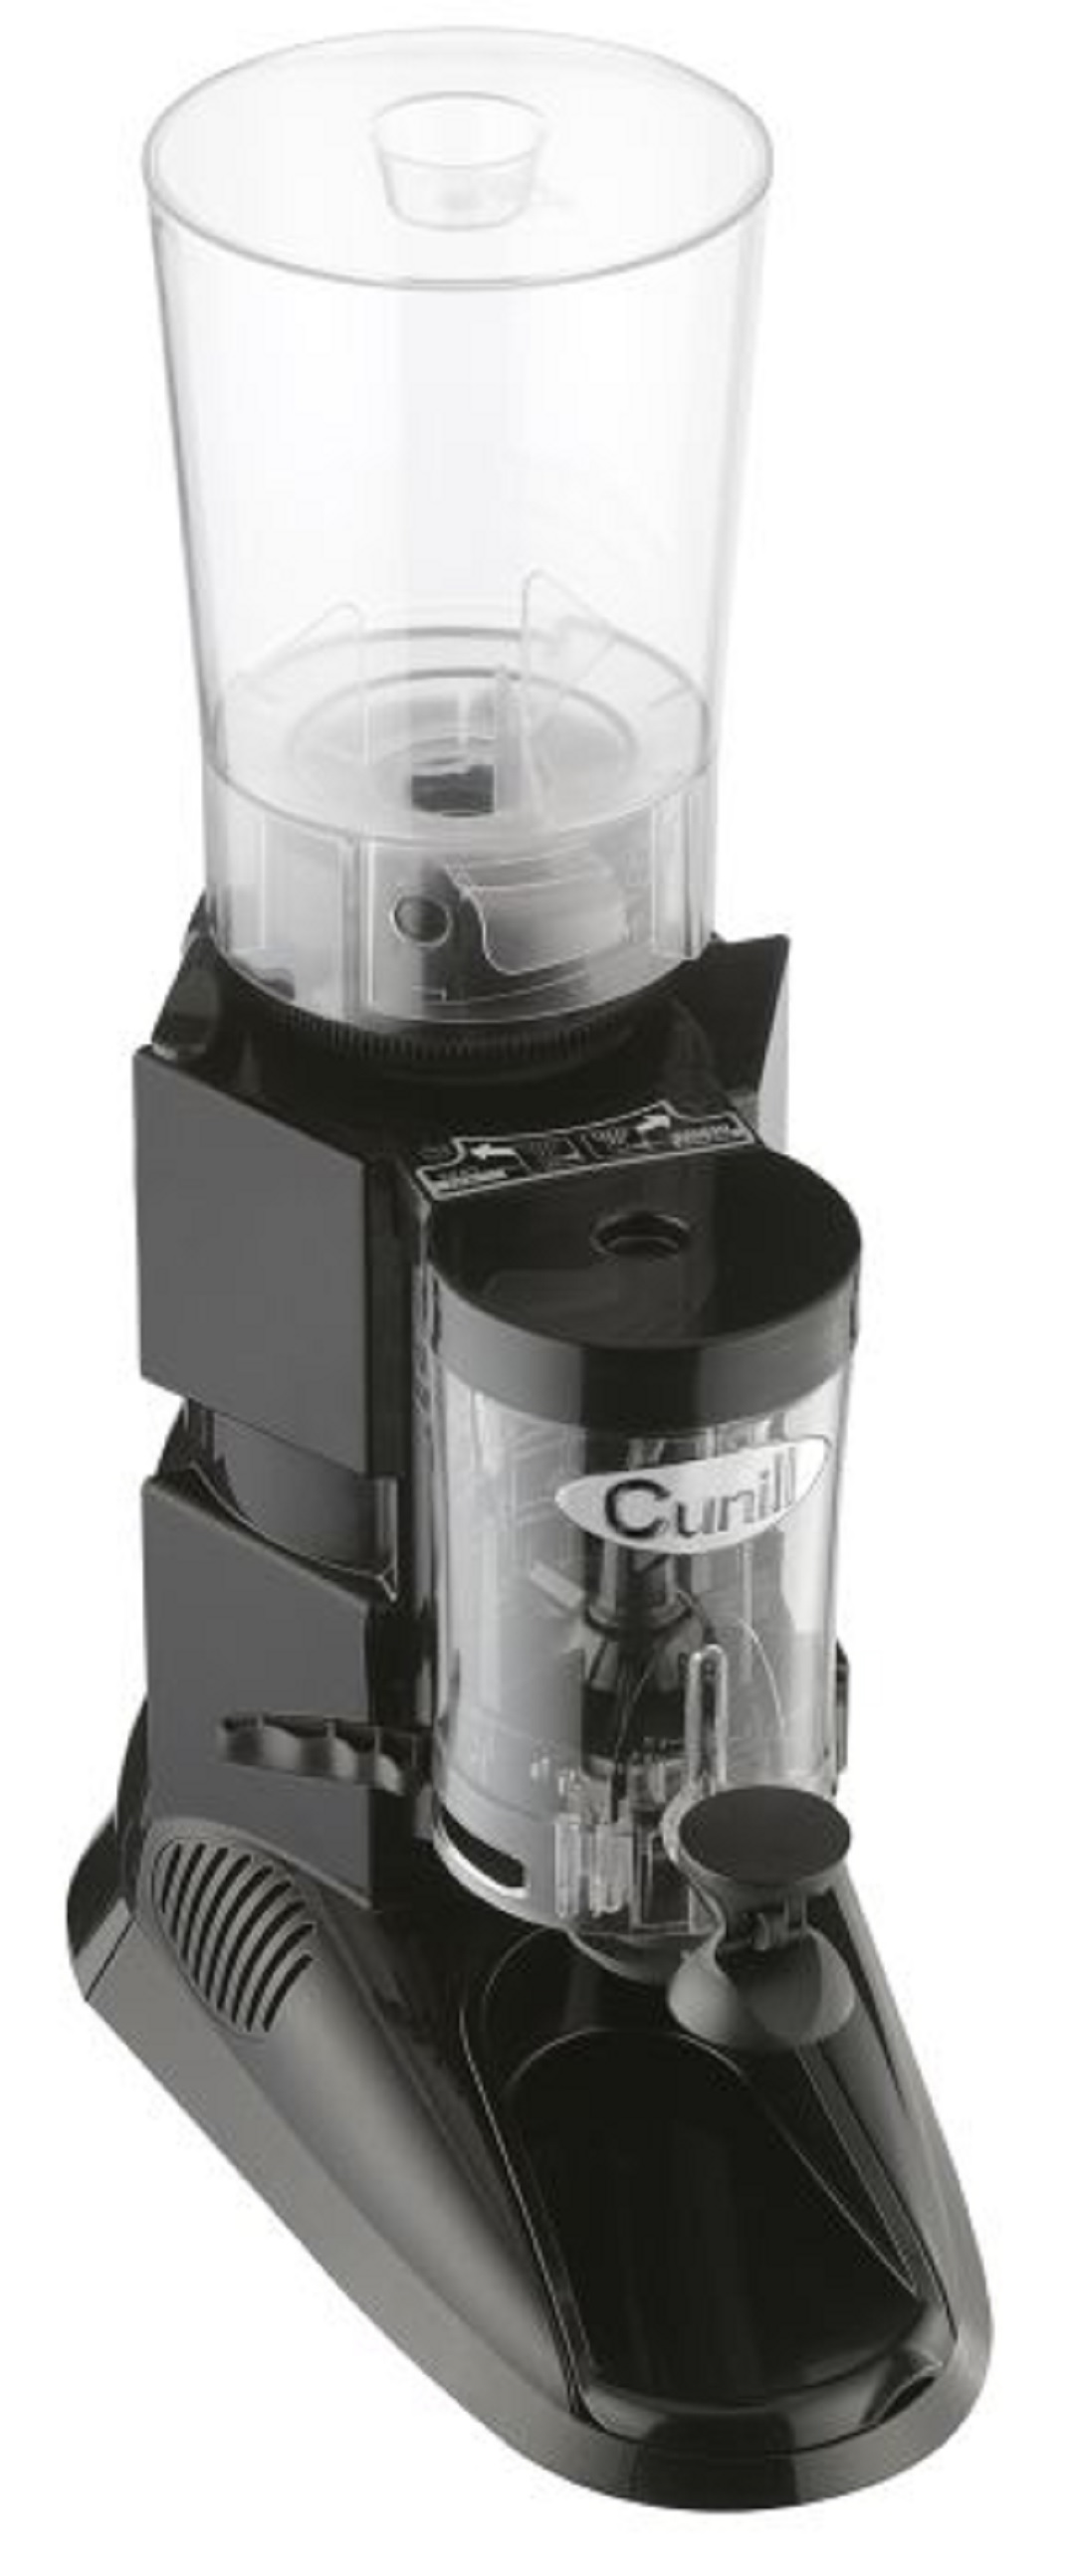 Cunill MC11 2KG Automatic Coffee Grinder (Silent)